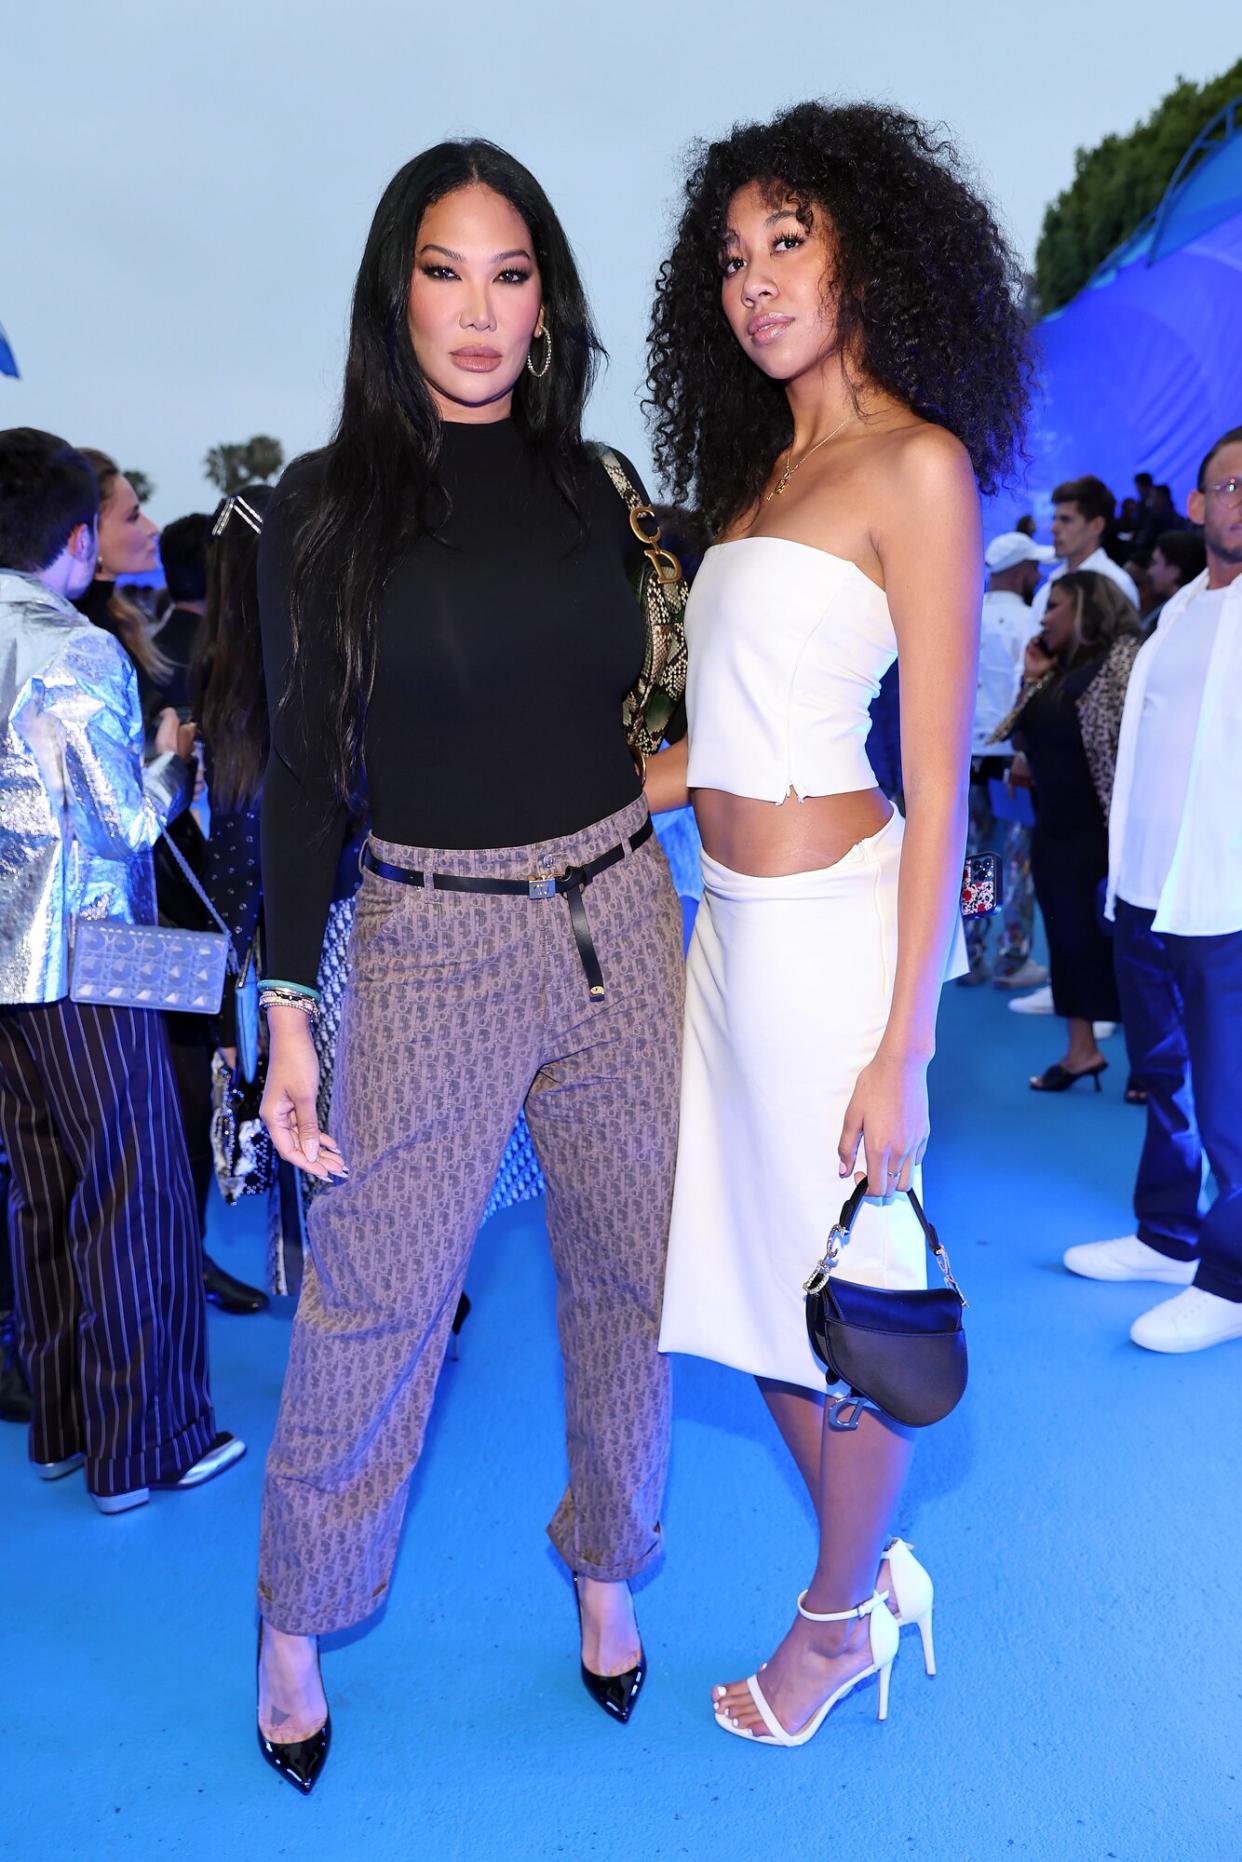 Kimora Lee Simmons and Aoki Lee Simmons attend the Dior Men's Spring/Summer 2023 Collection on May 19, 2022 in Los Angeles, California